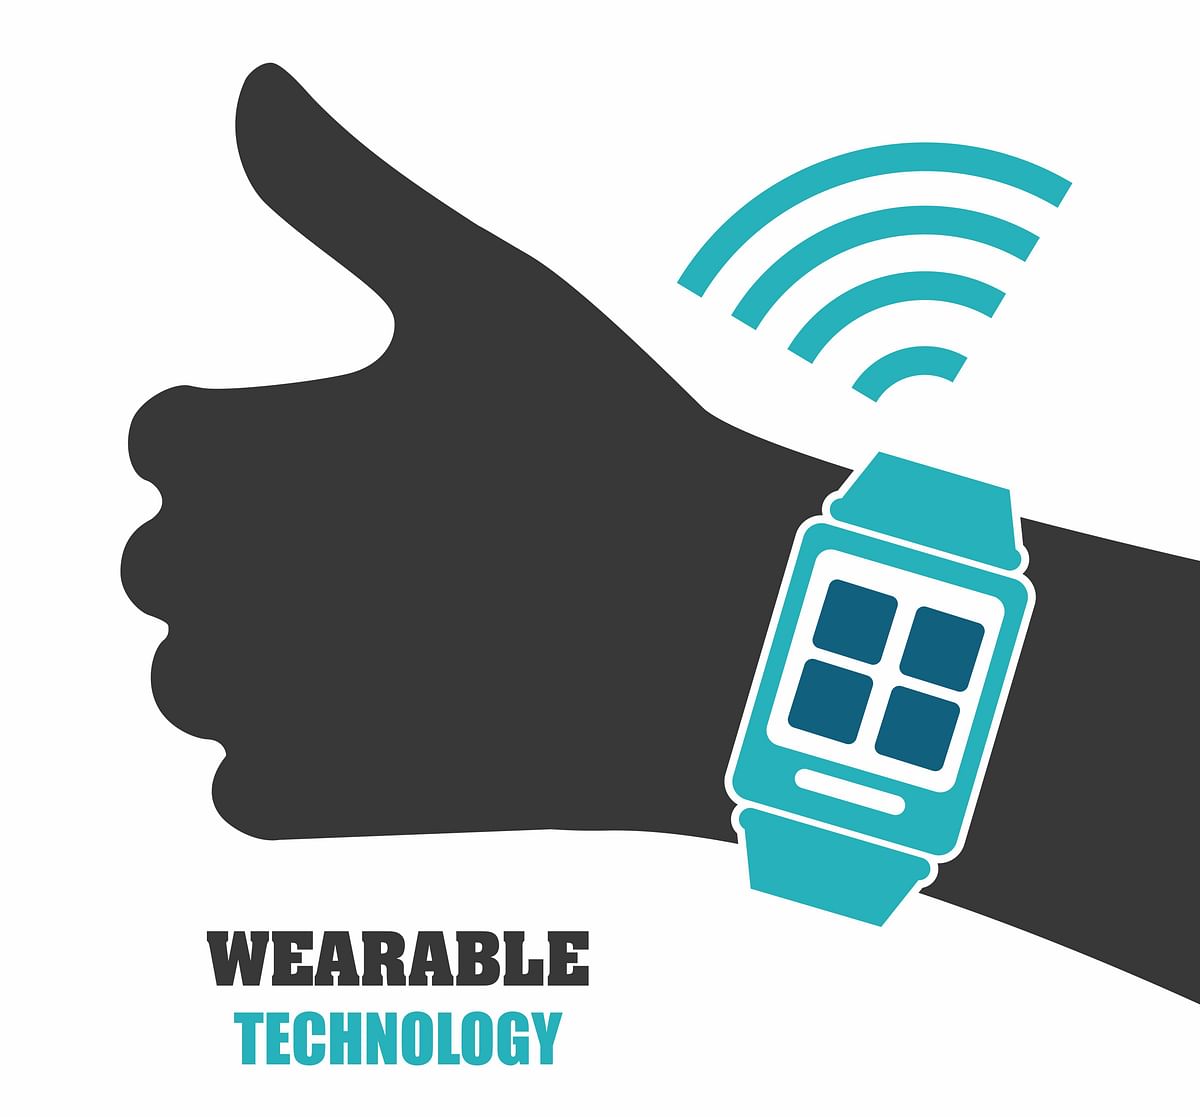 NASA scientists develops Wi-Fi microchip for wearable devices